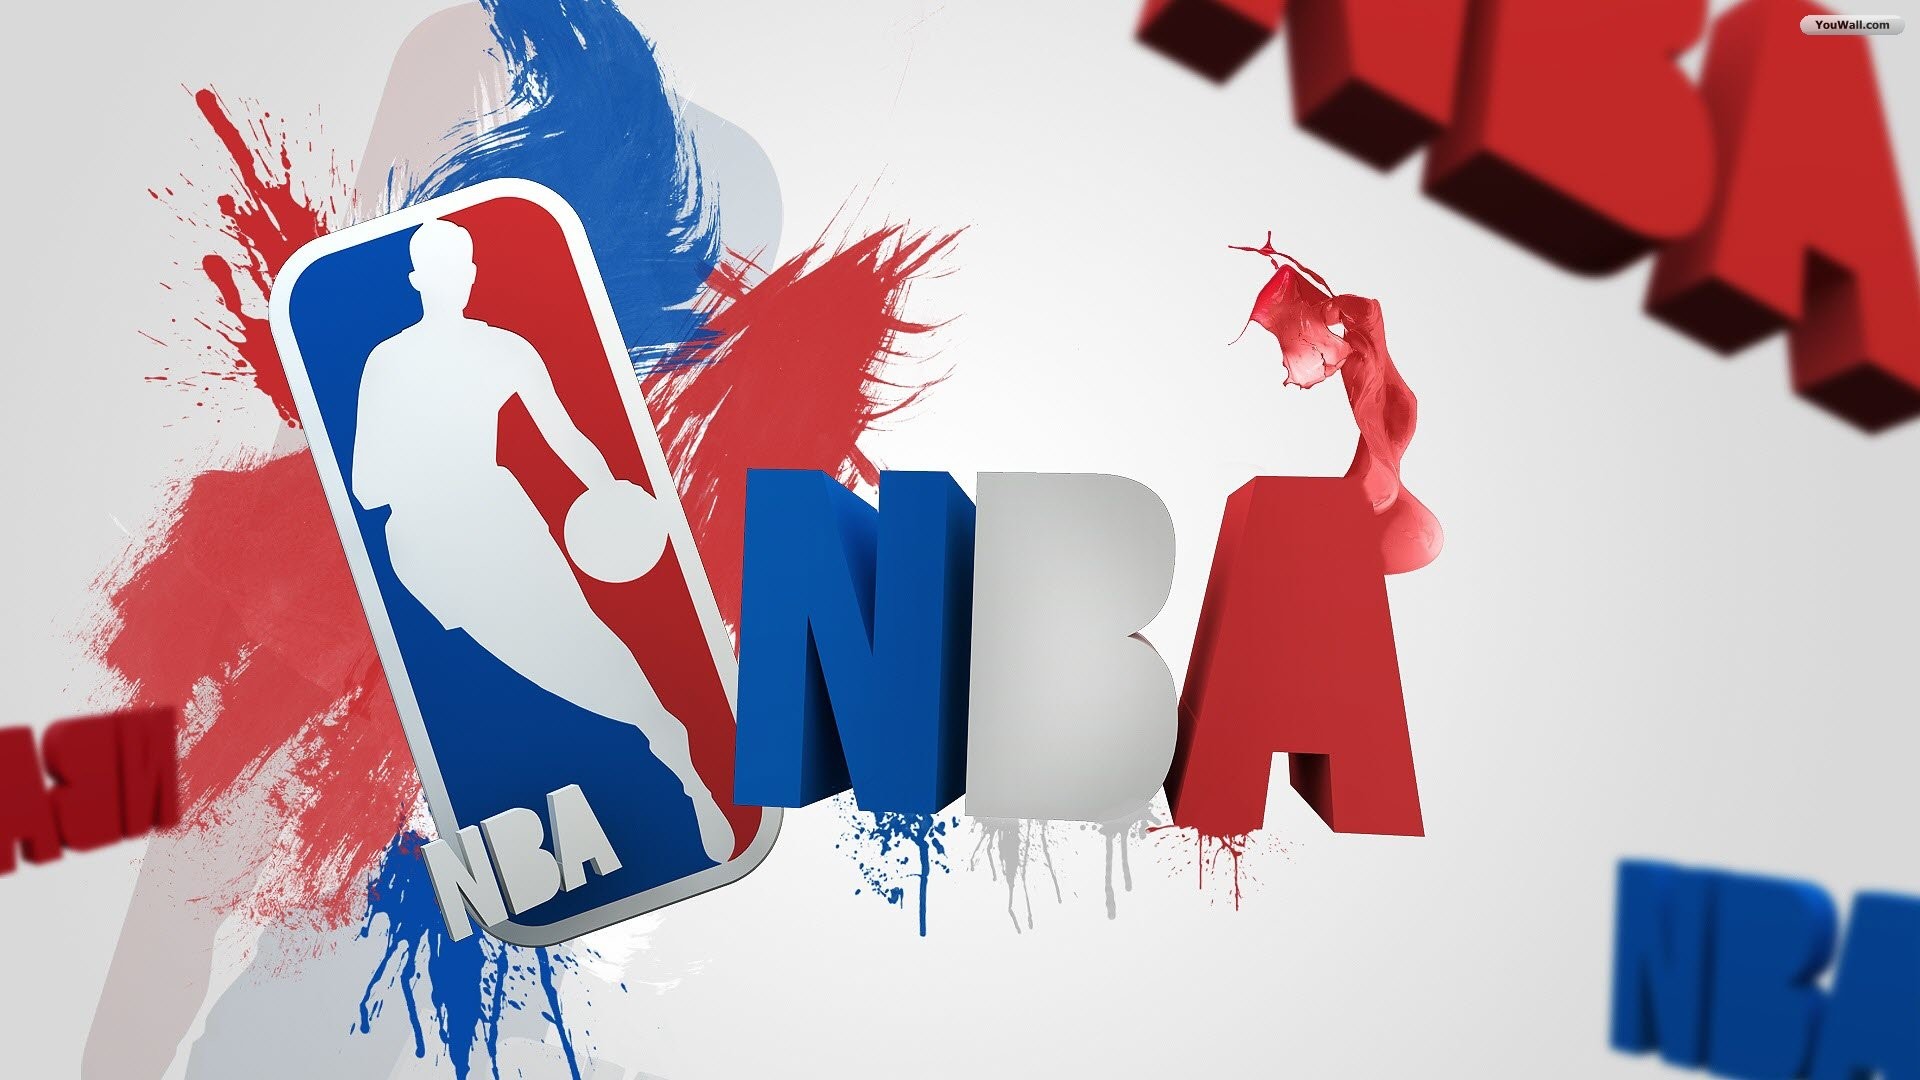 1920x1080 NBA basketball wallpapers of the biggest events and best players